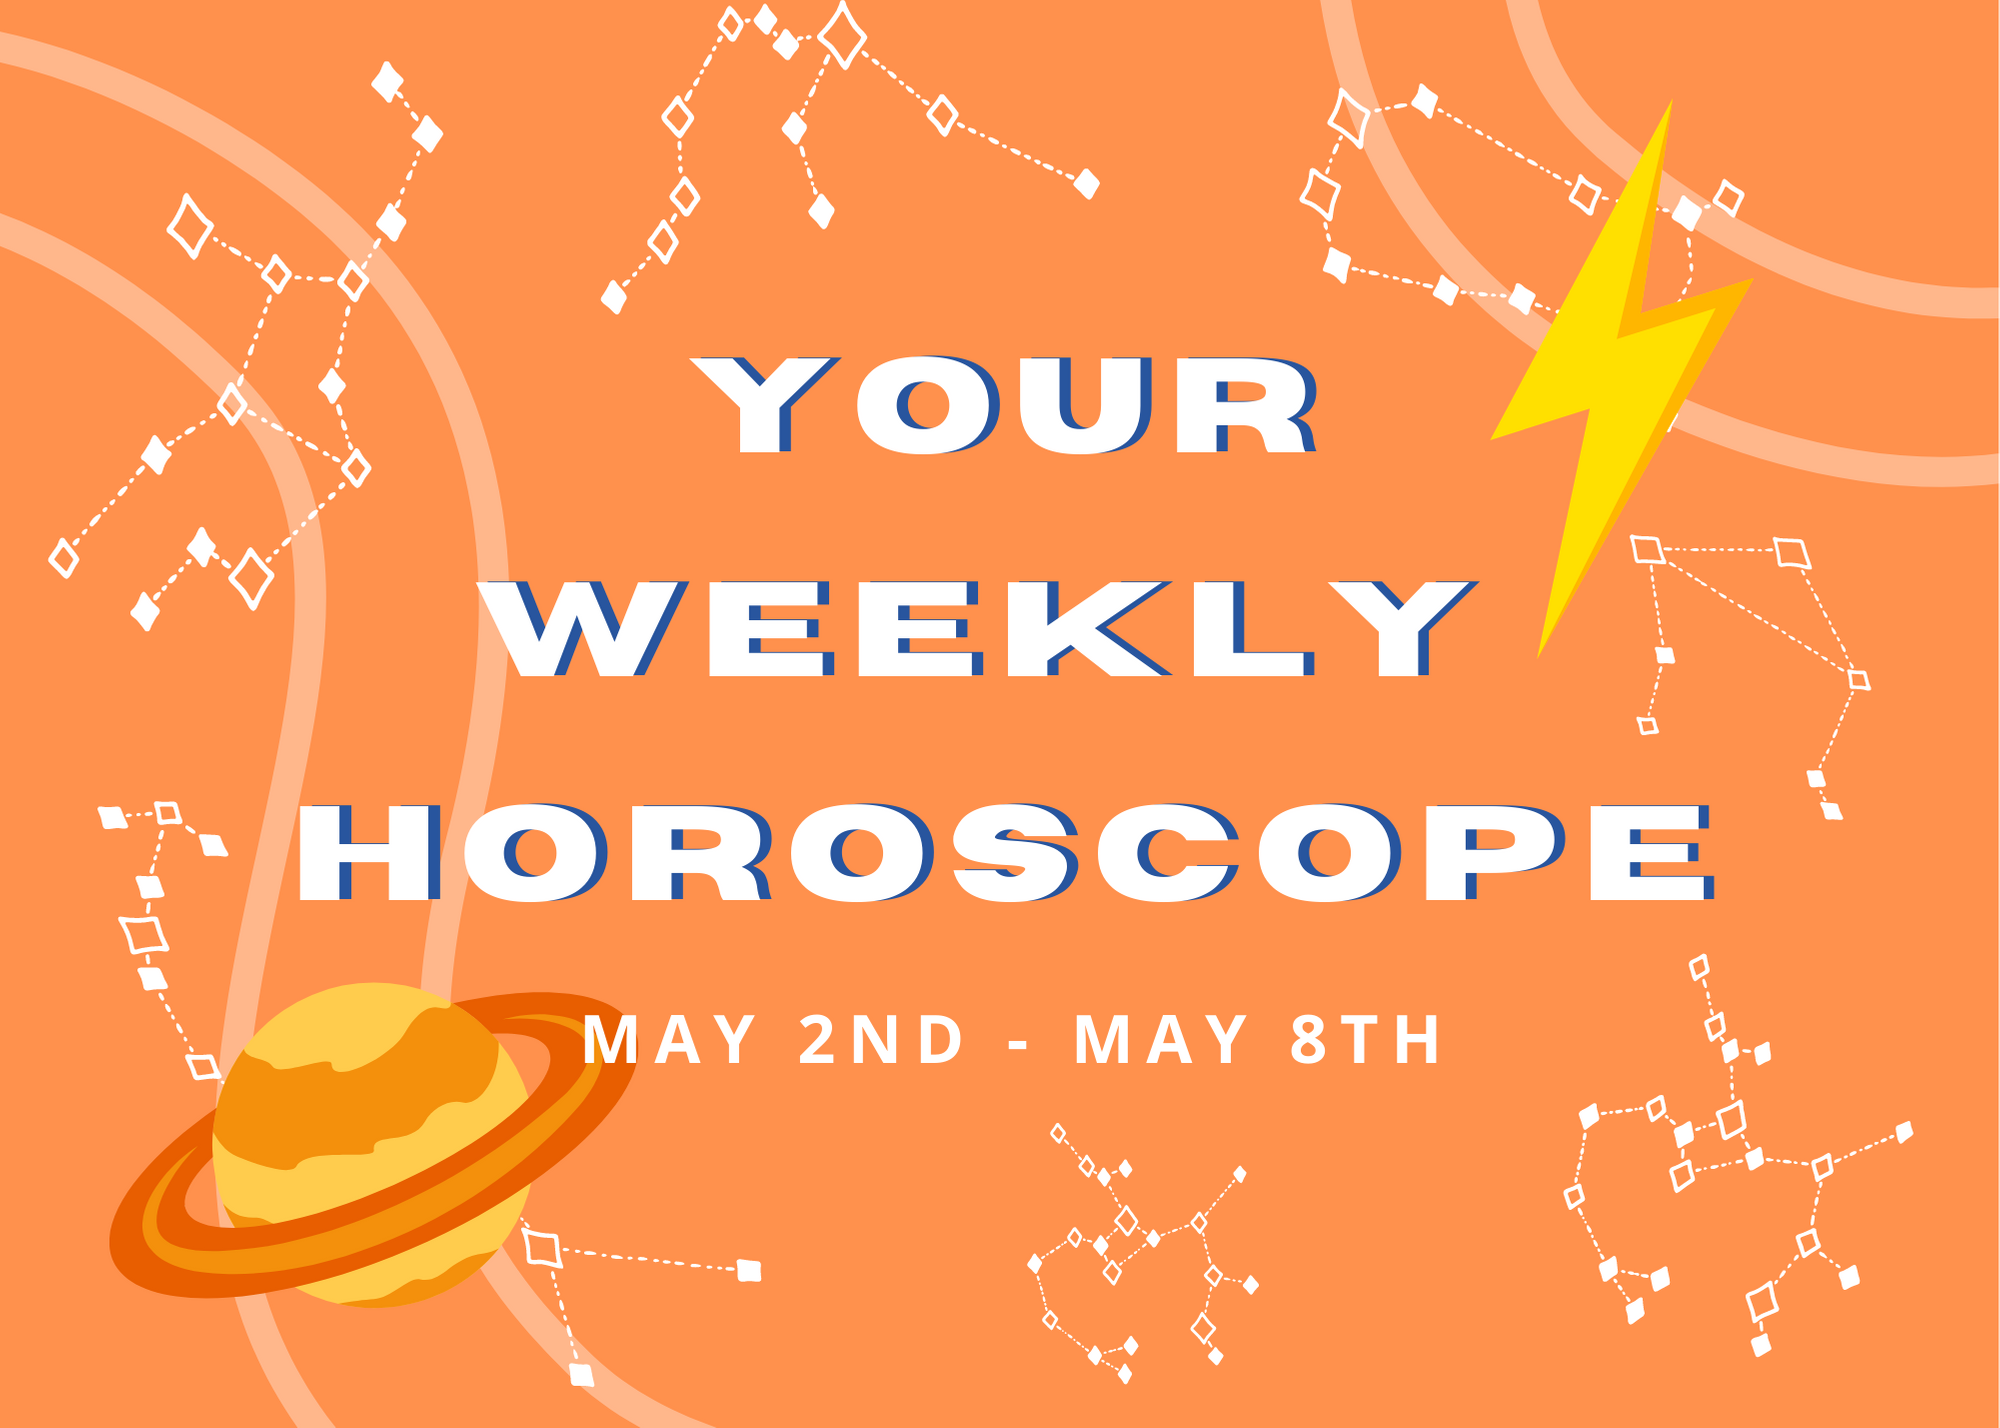 Your Weekly Horoscope 5/3 ✨